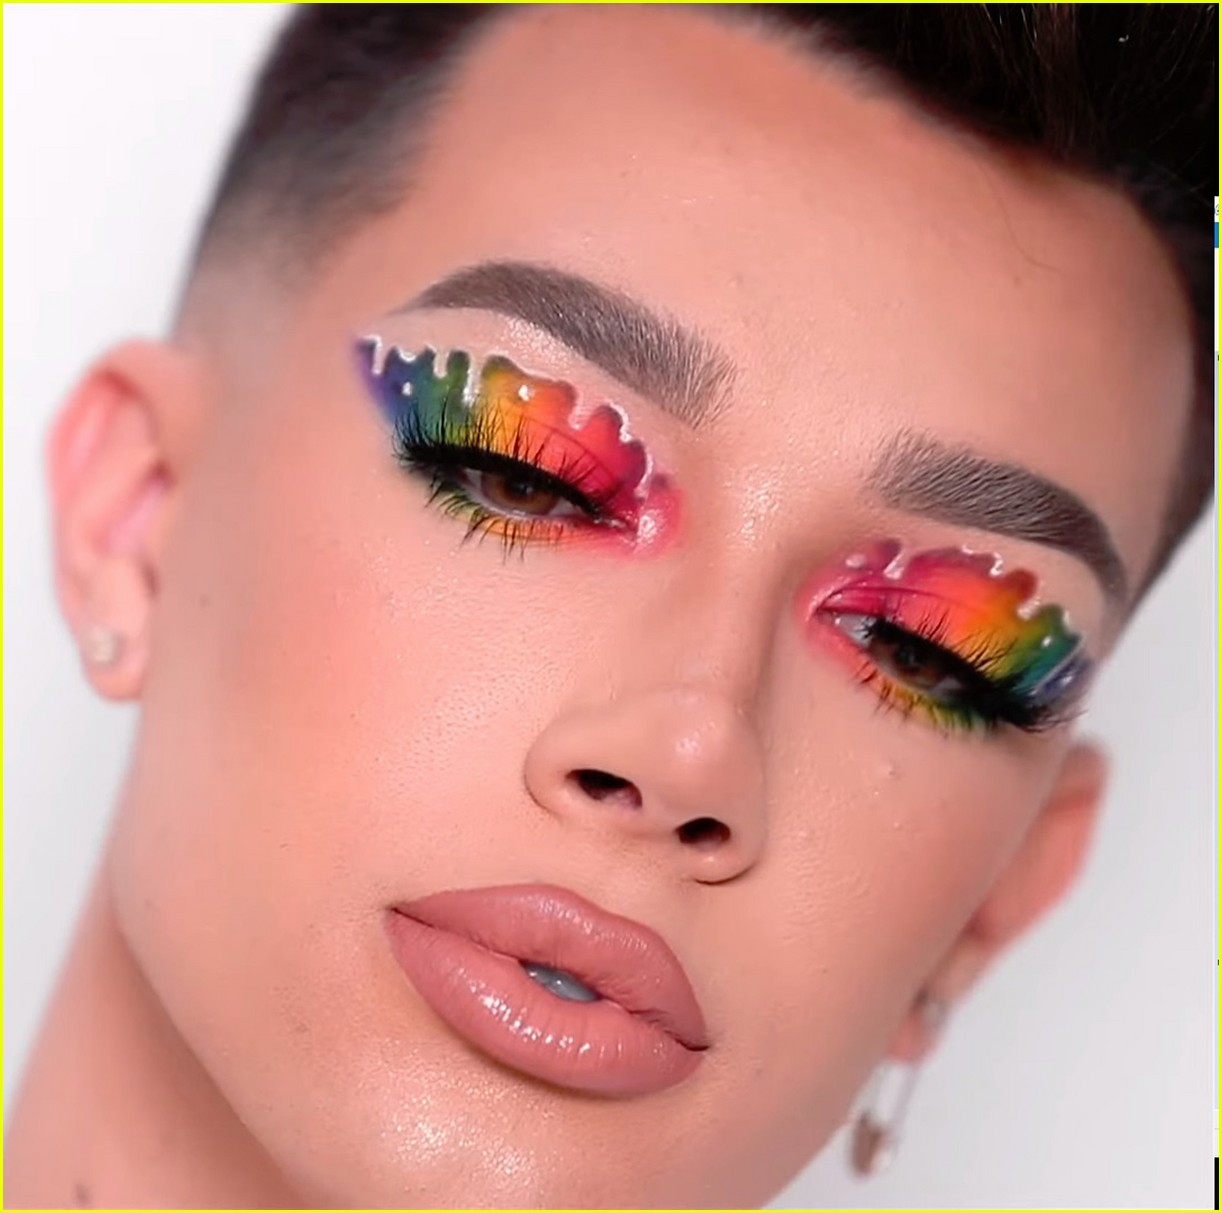 james charles returns to youtube to donate proceeds to trevor project 03